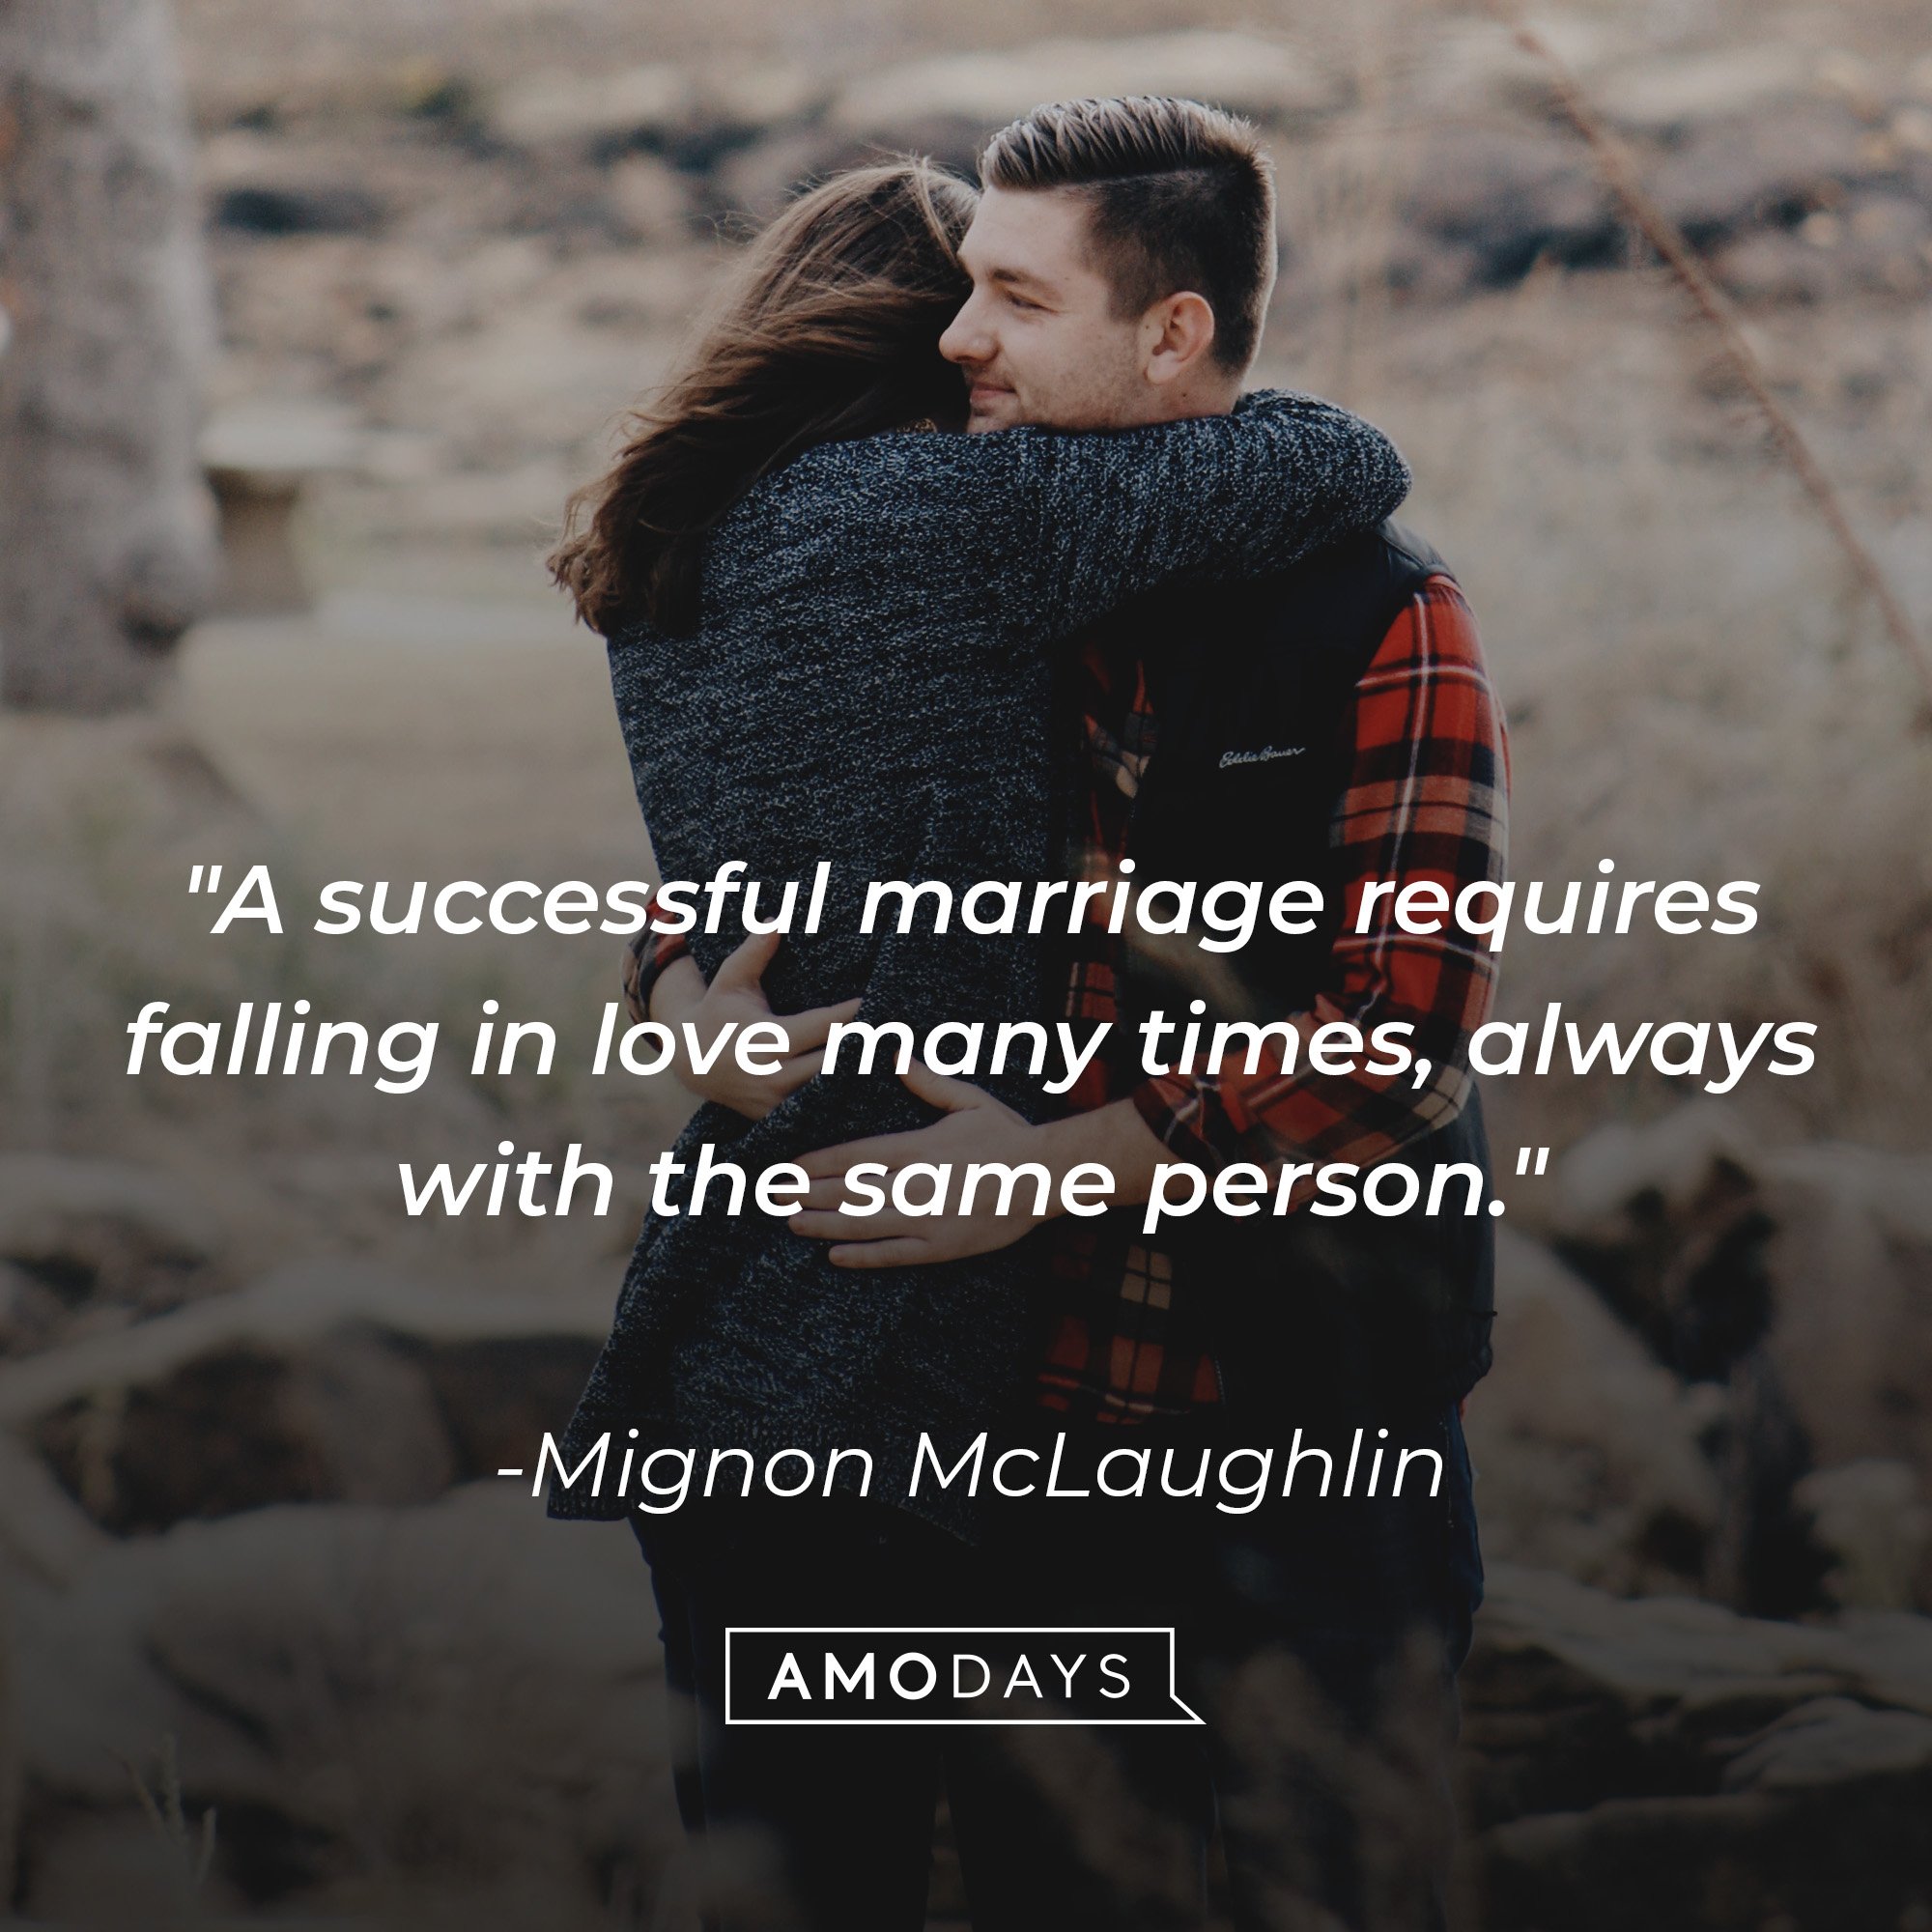 Mignon McLaughlin's quote: "A successful marriage requires falling in love many times, always with the same person." | Image: AmoDays